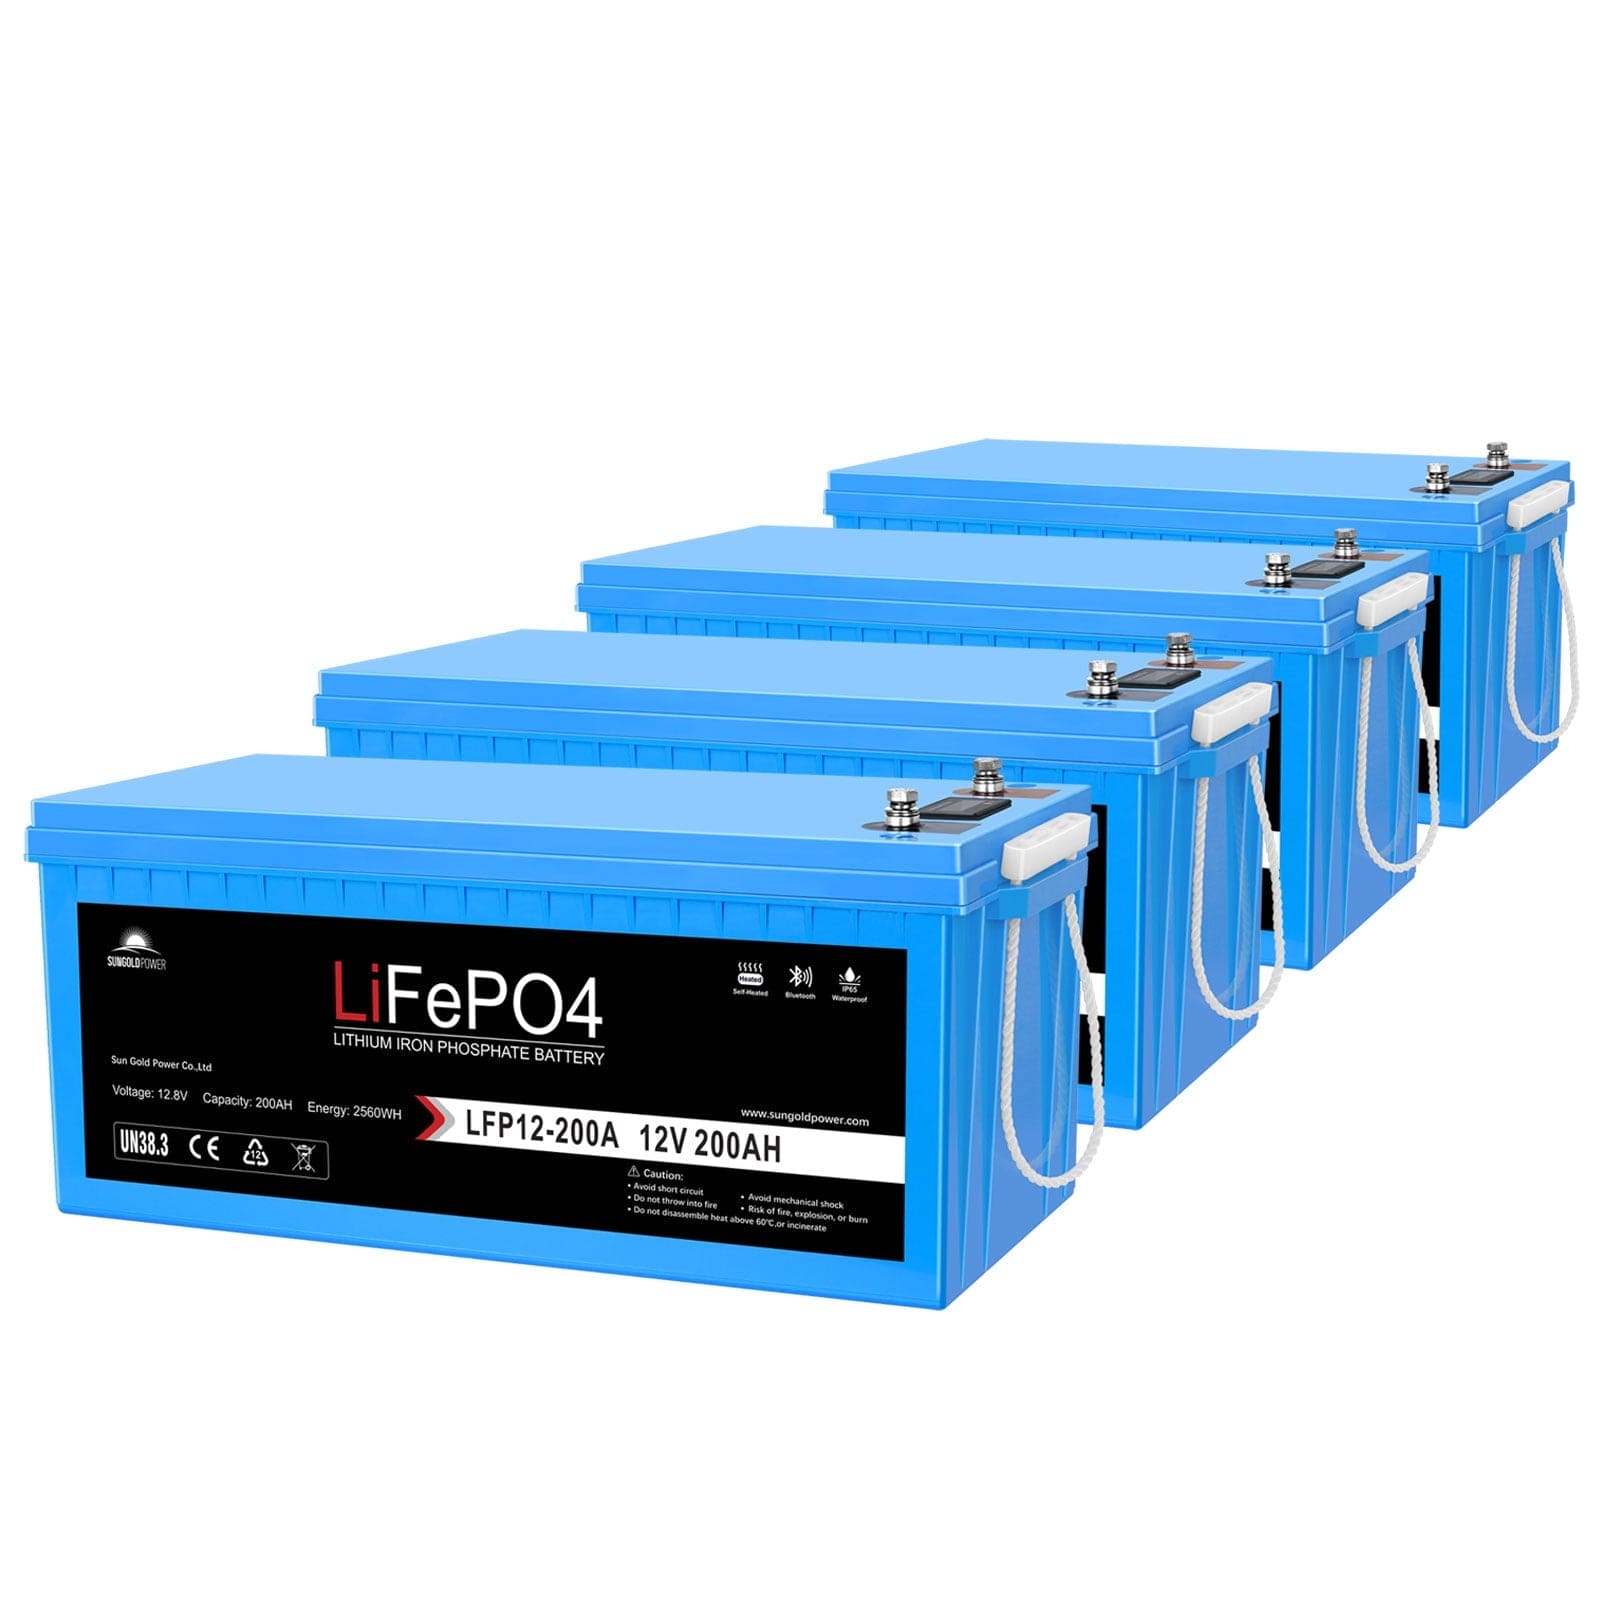 4 X 12V 200Ah LiFePo4 Deep Cycle Lithium Battery Bluetooth / Self-Heating / IP65 SunGoldPower Battery